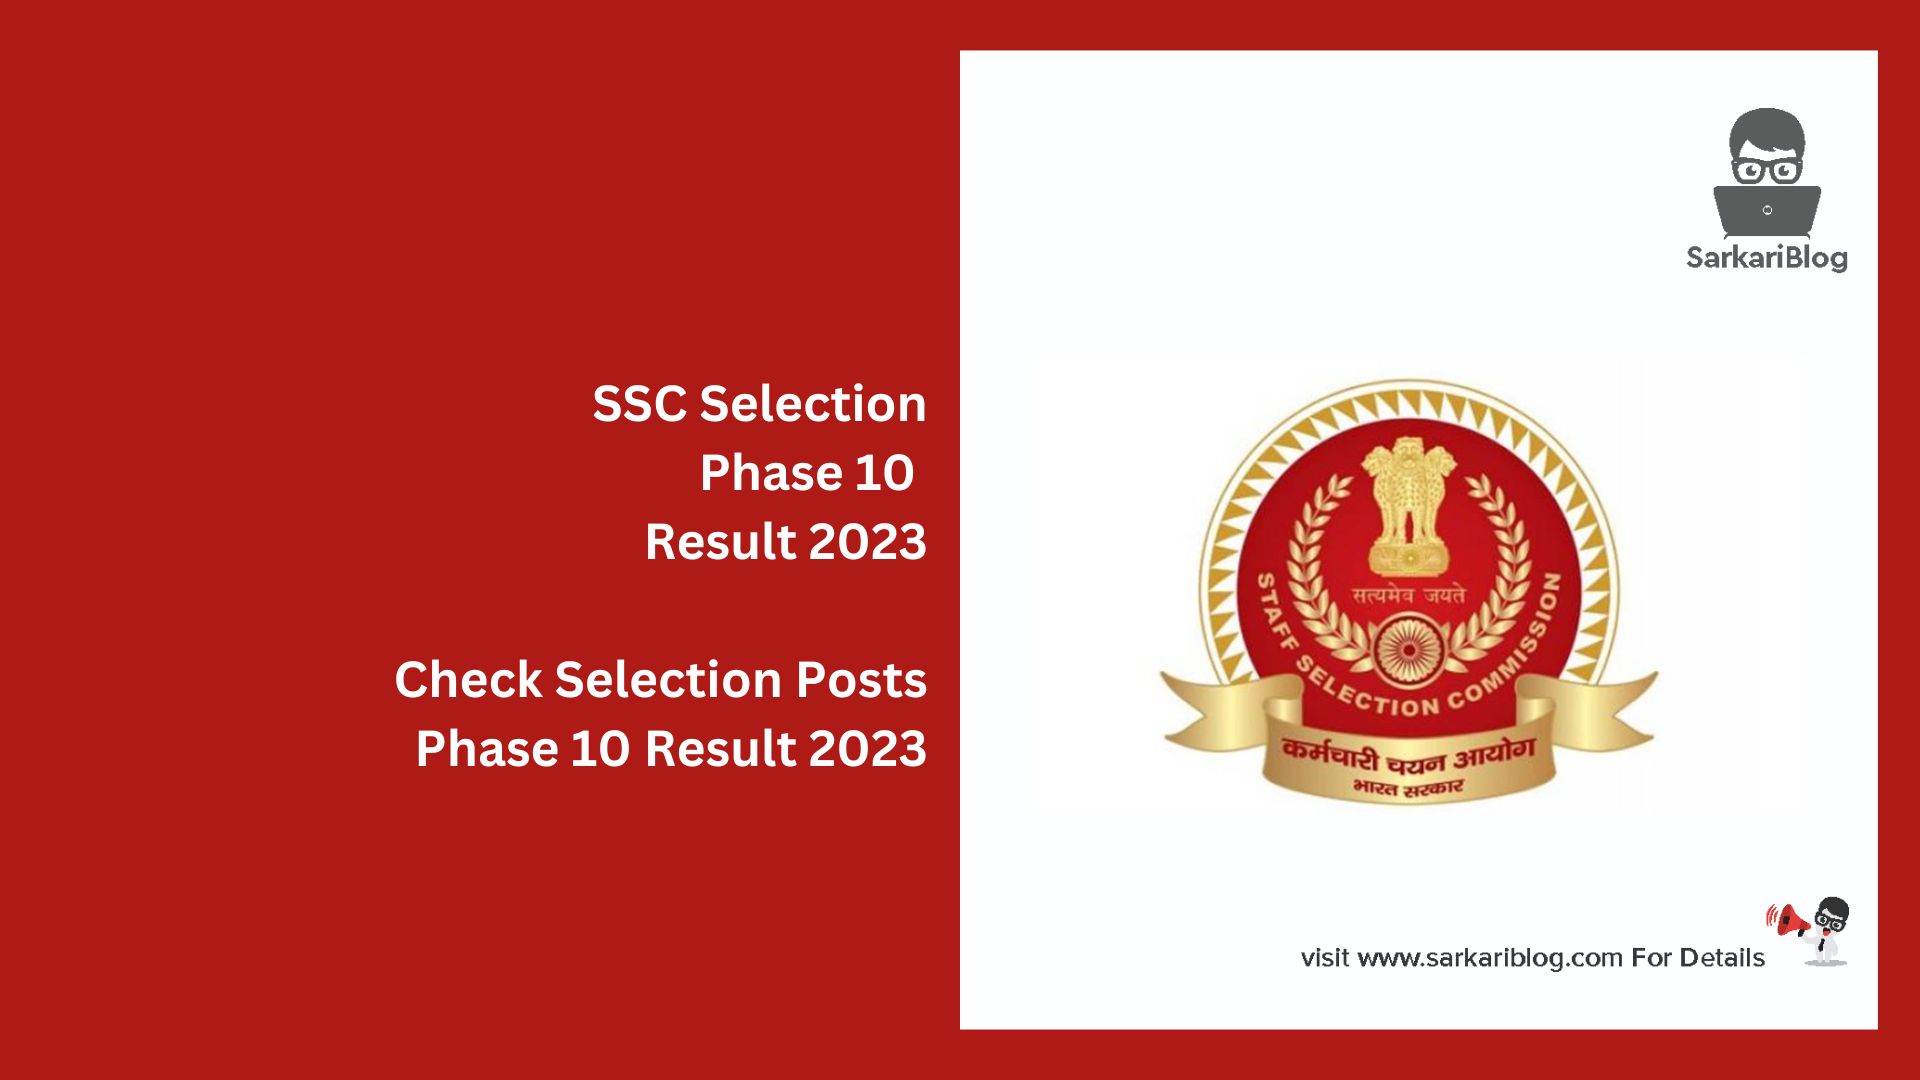 SSC Selection Phase 10 Result 2023